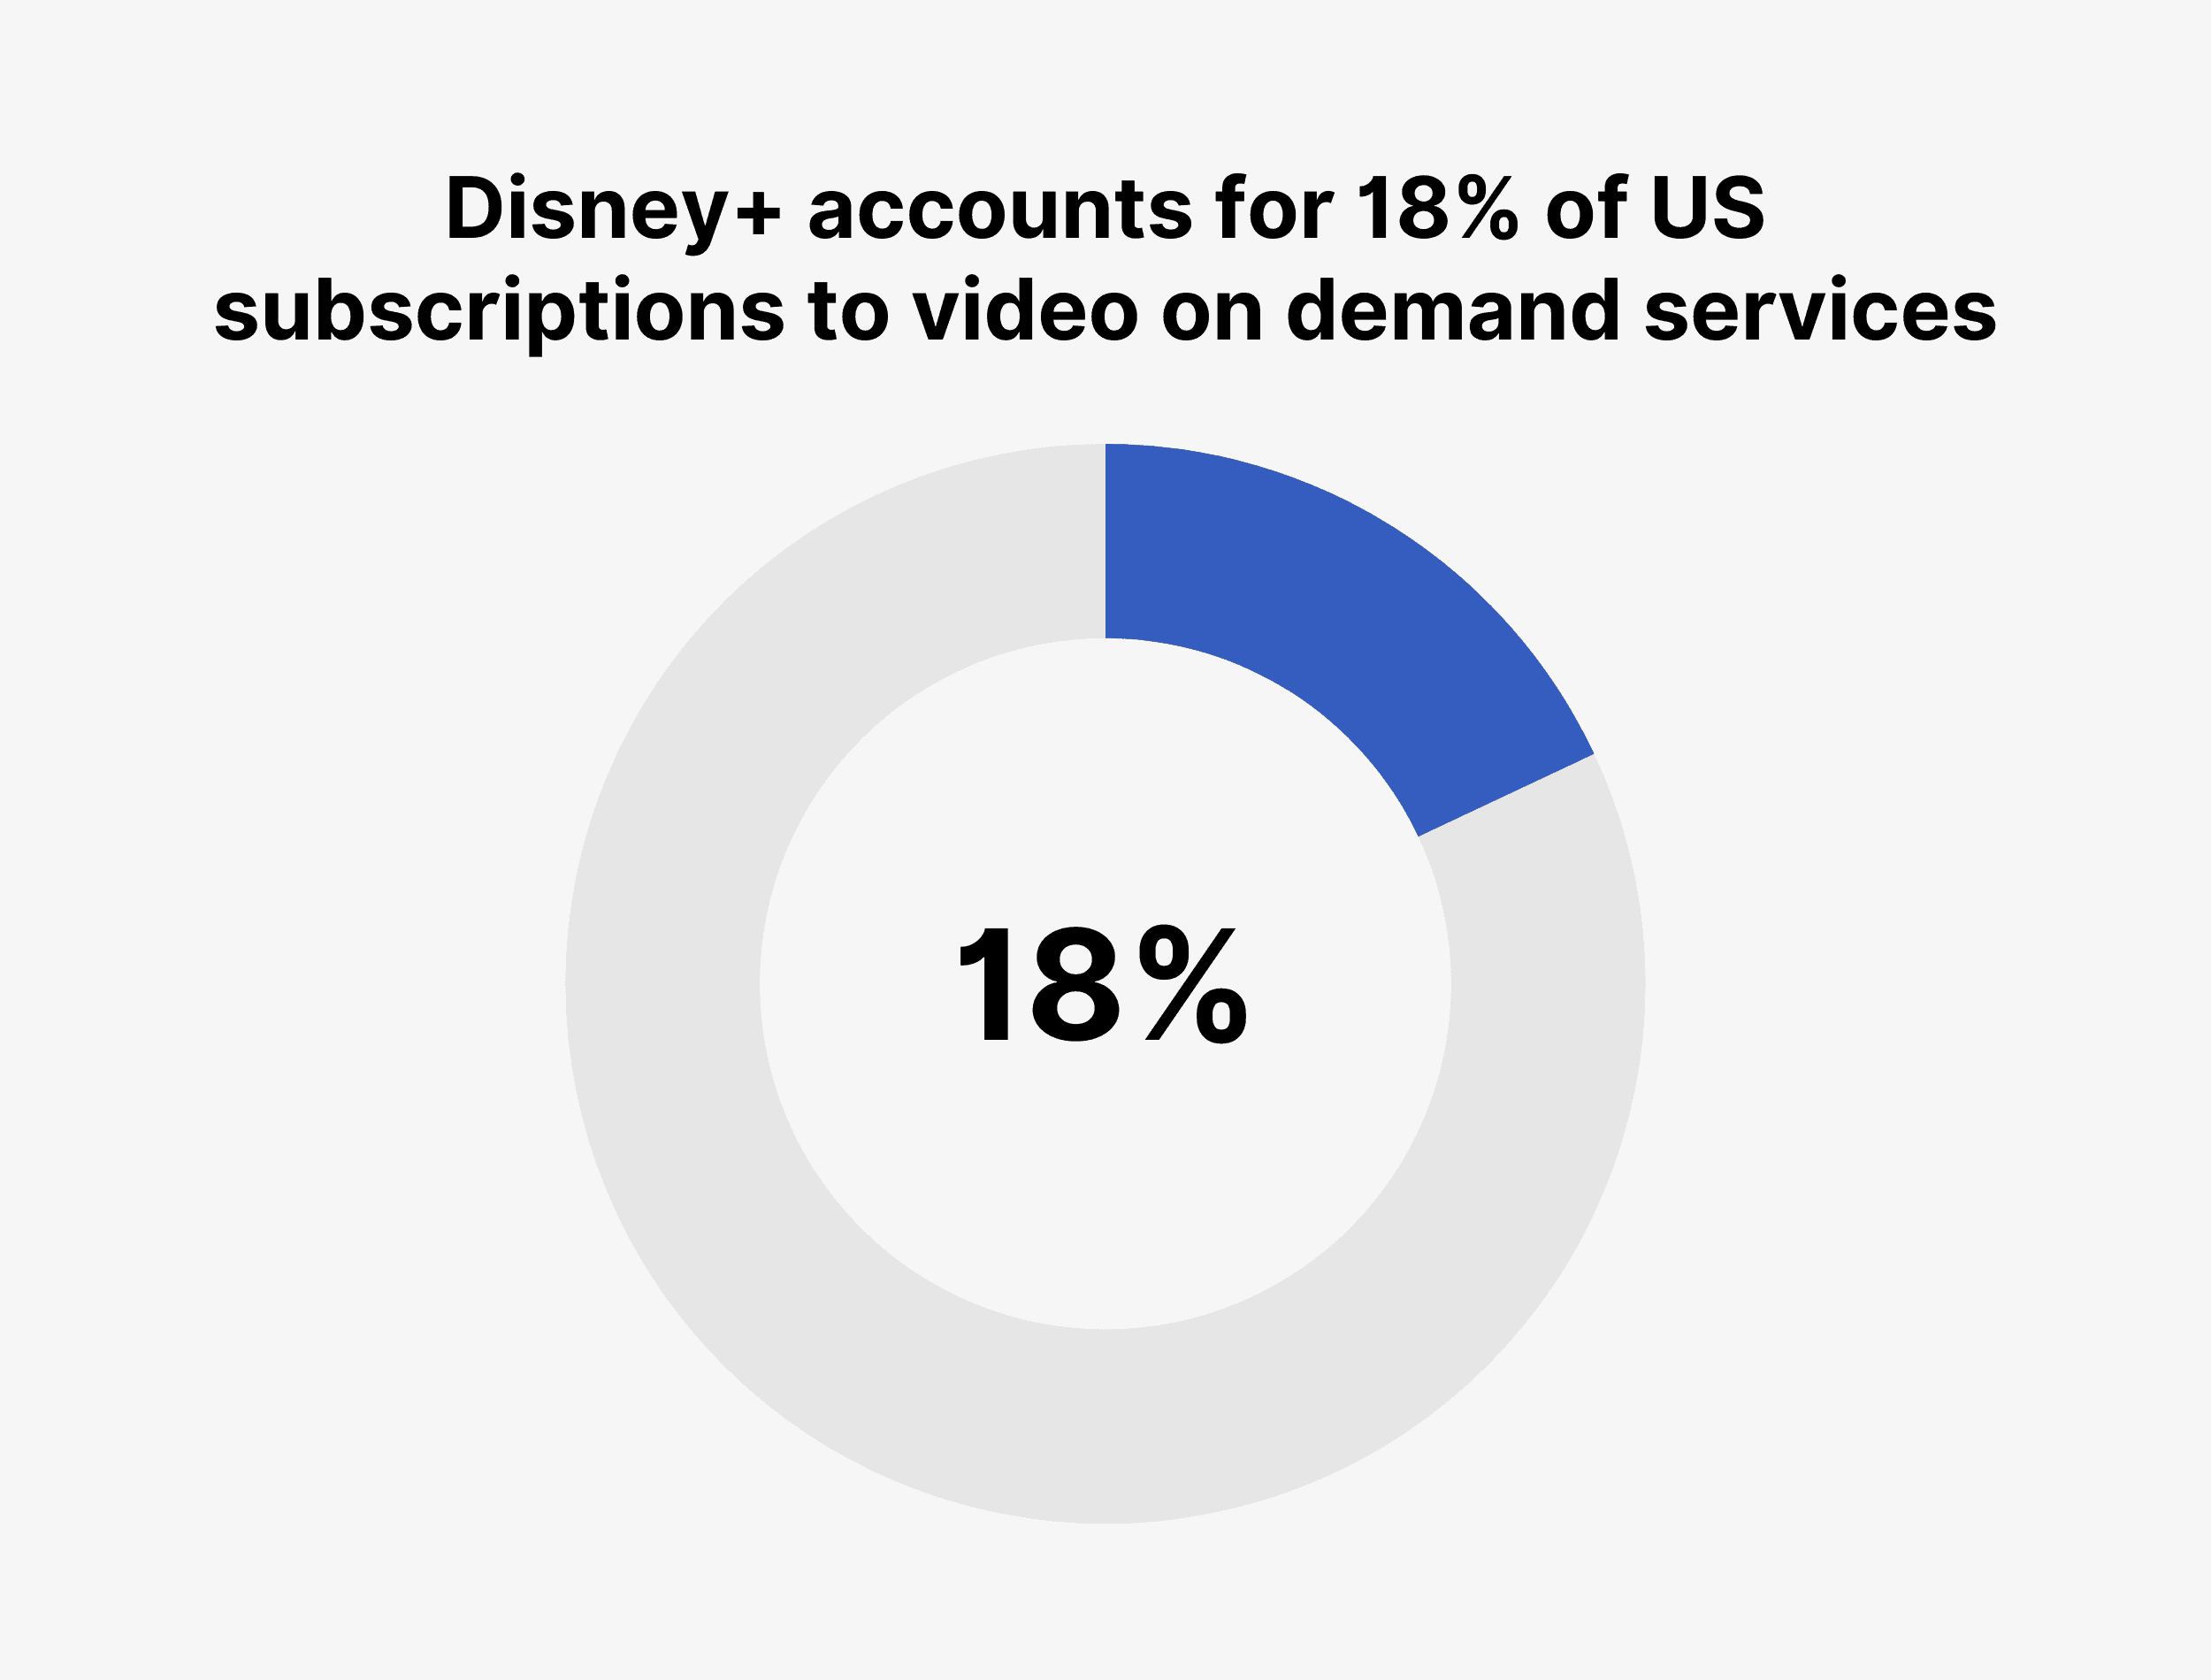 Disney+ accounts for 18% of US subscriptions to video on demand services